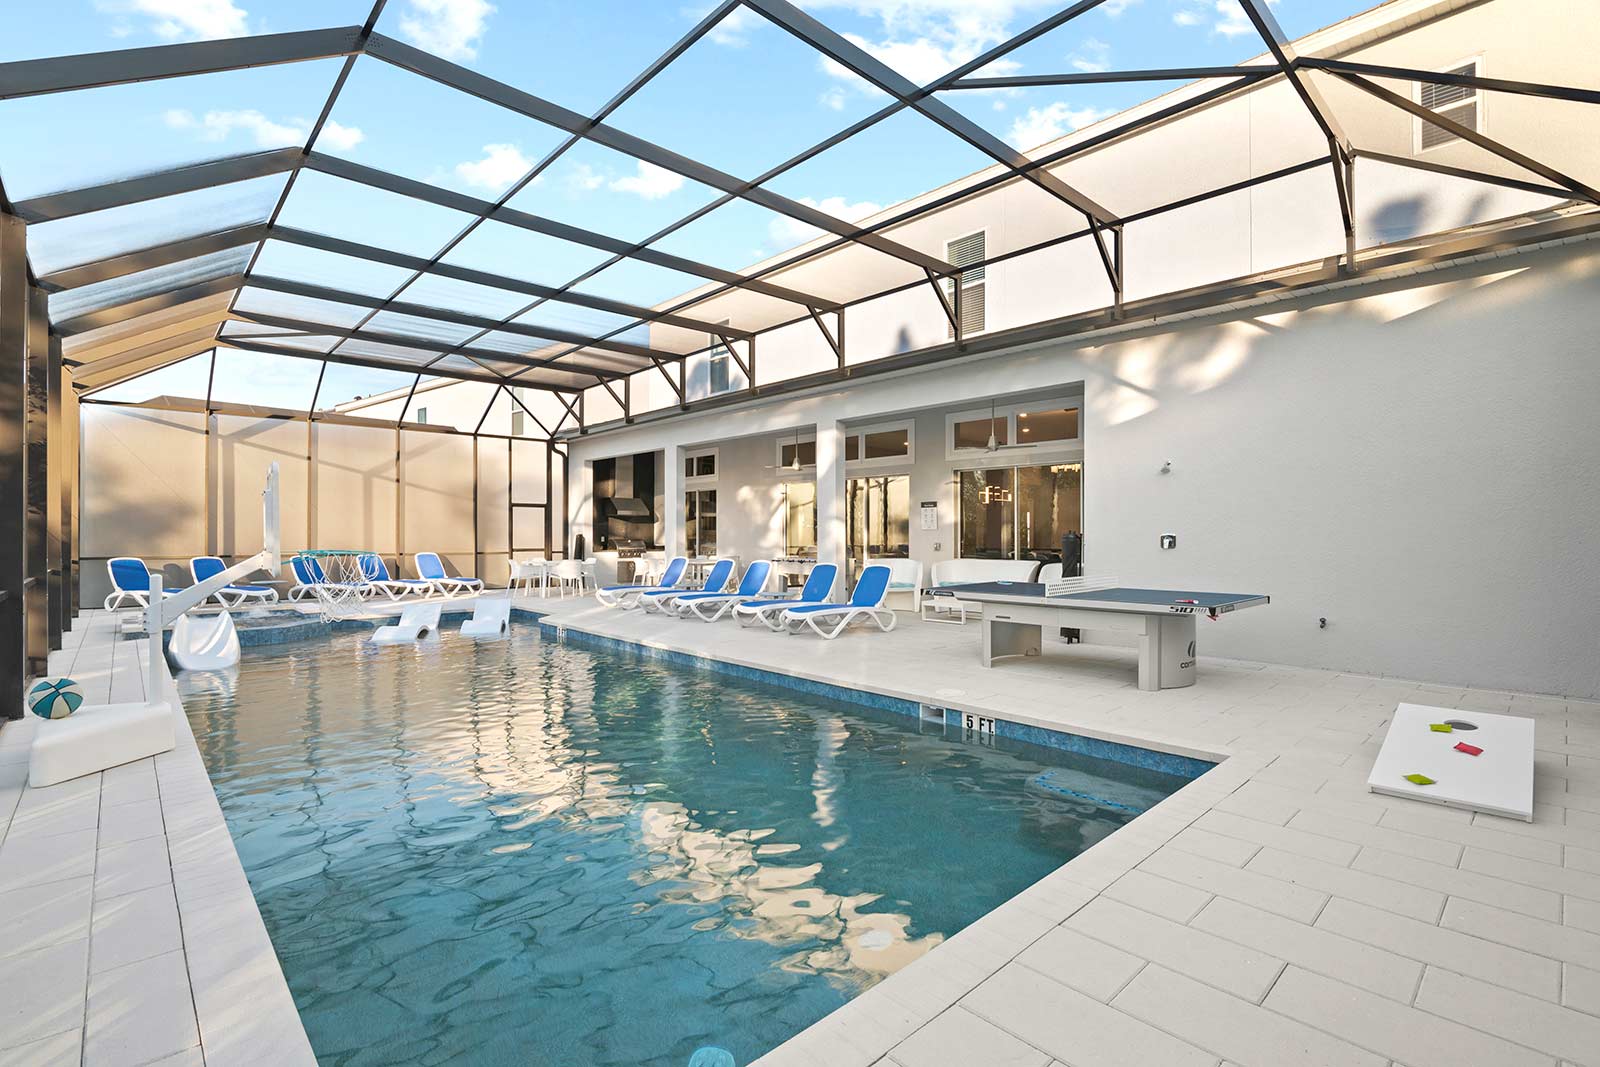 [amenities:pool-and-spa:2] Pool and Spa